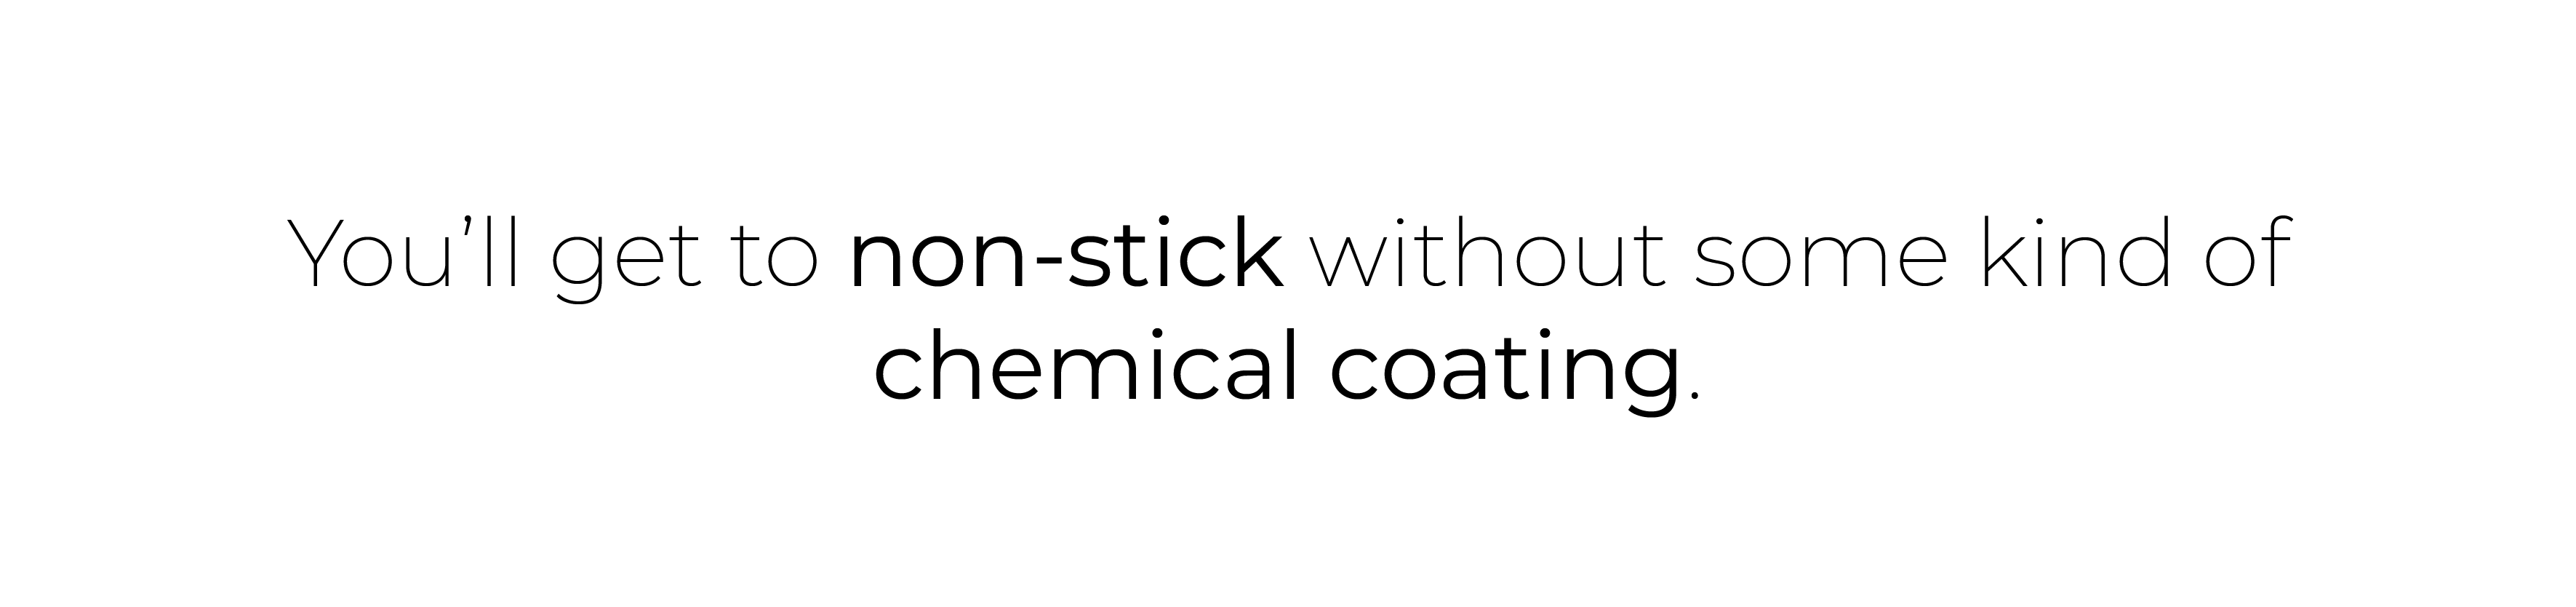 non stick pans chemical coating